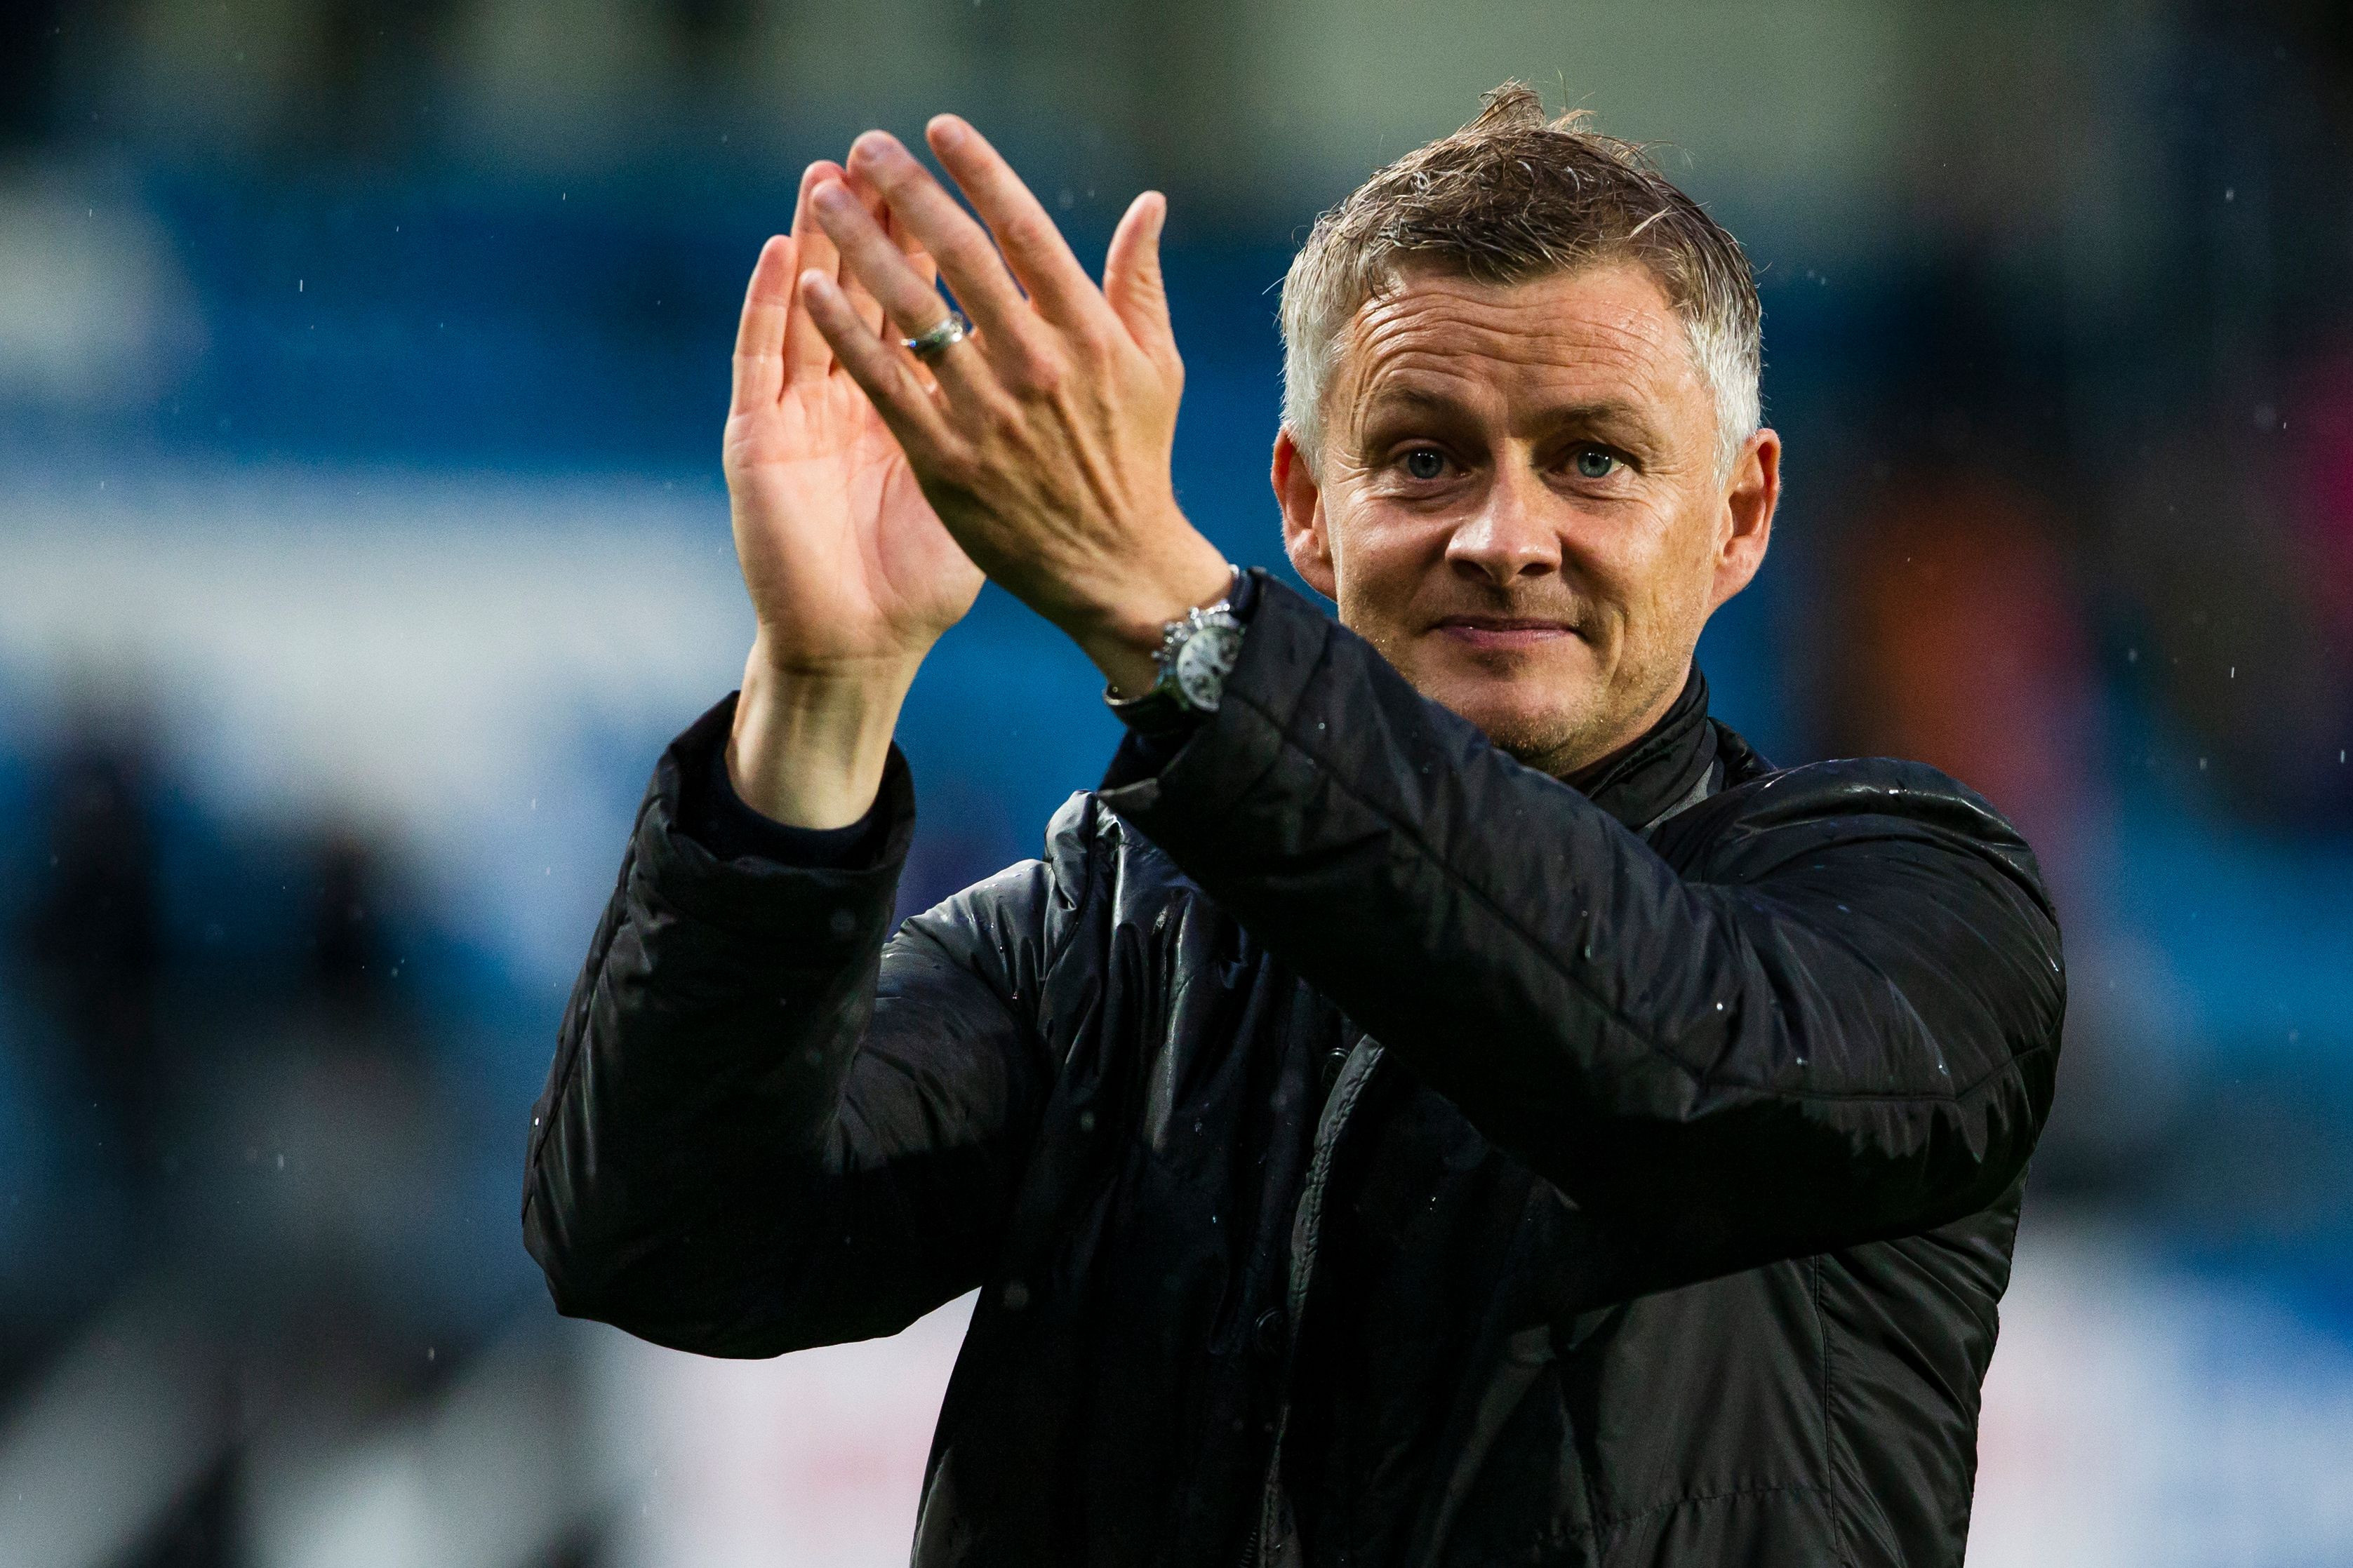 Molde FK´s headcoach Ole Gunnar Solskjaer celebrates after the UEFA Champions League third round, second leg qualifying football match between Molde FK and Hibernian at the Aker Stadium in Molde, Norway, on August 16, 2018. (Photo by Svein Ove Ekornesvaag / NTB SCANPIX / AFP) / Norway OUT        (Photo credit should read SVEIN OVE EKORNESVAAG/AFP/Getty Images)